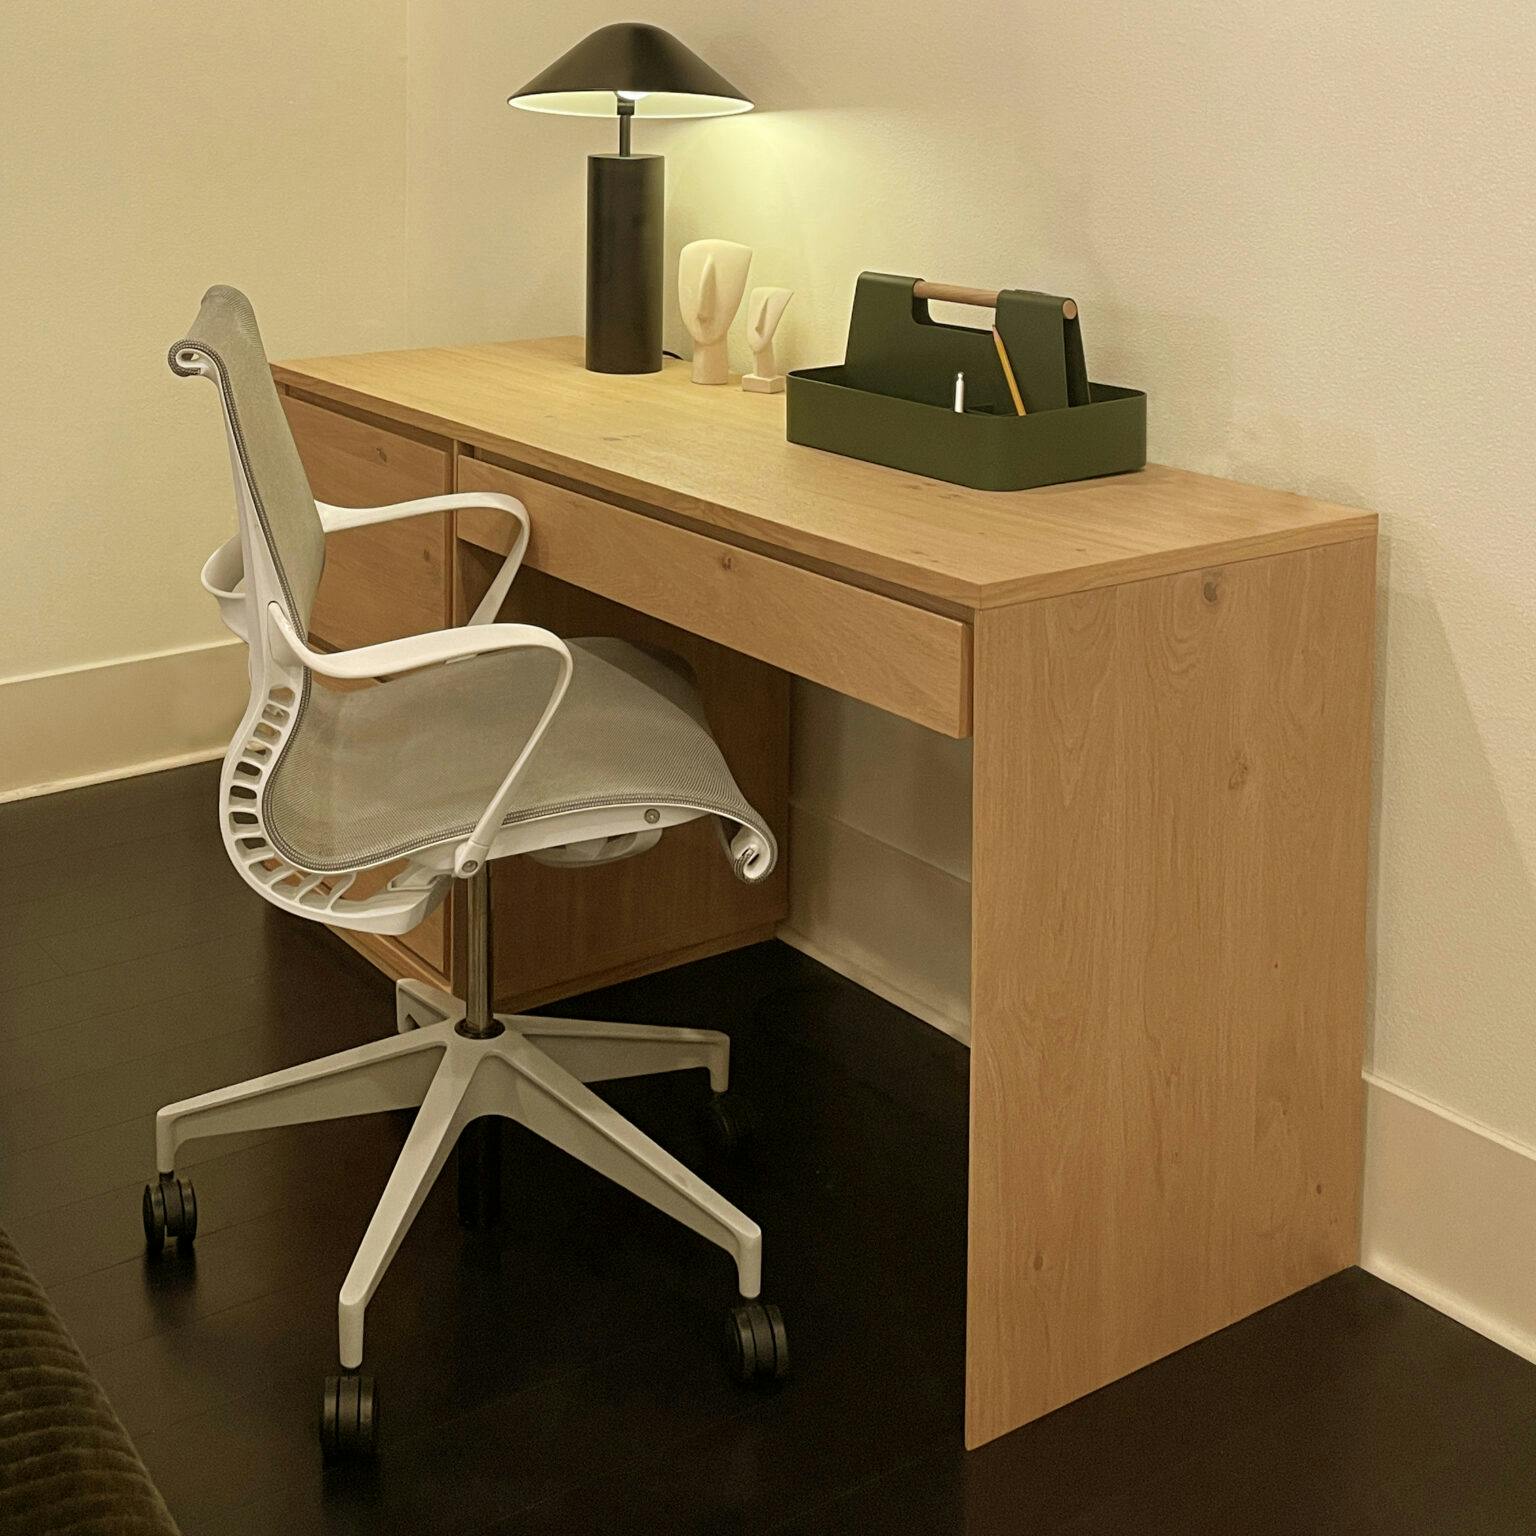 A compact desk and sleek ergonomic chair provide a calming spot to plan, journal or draw. 